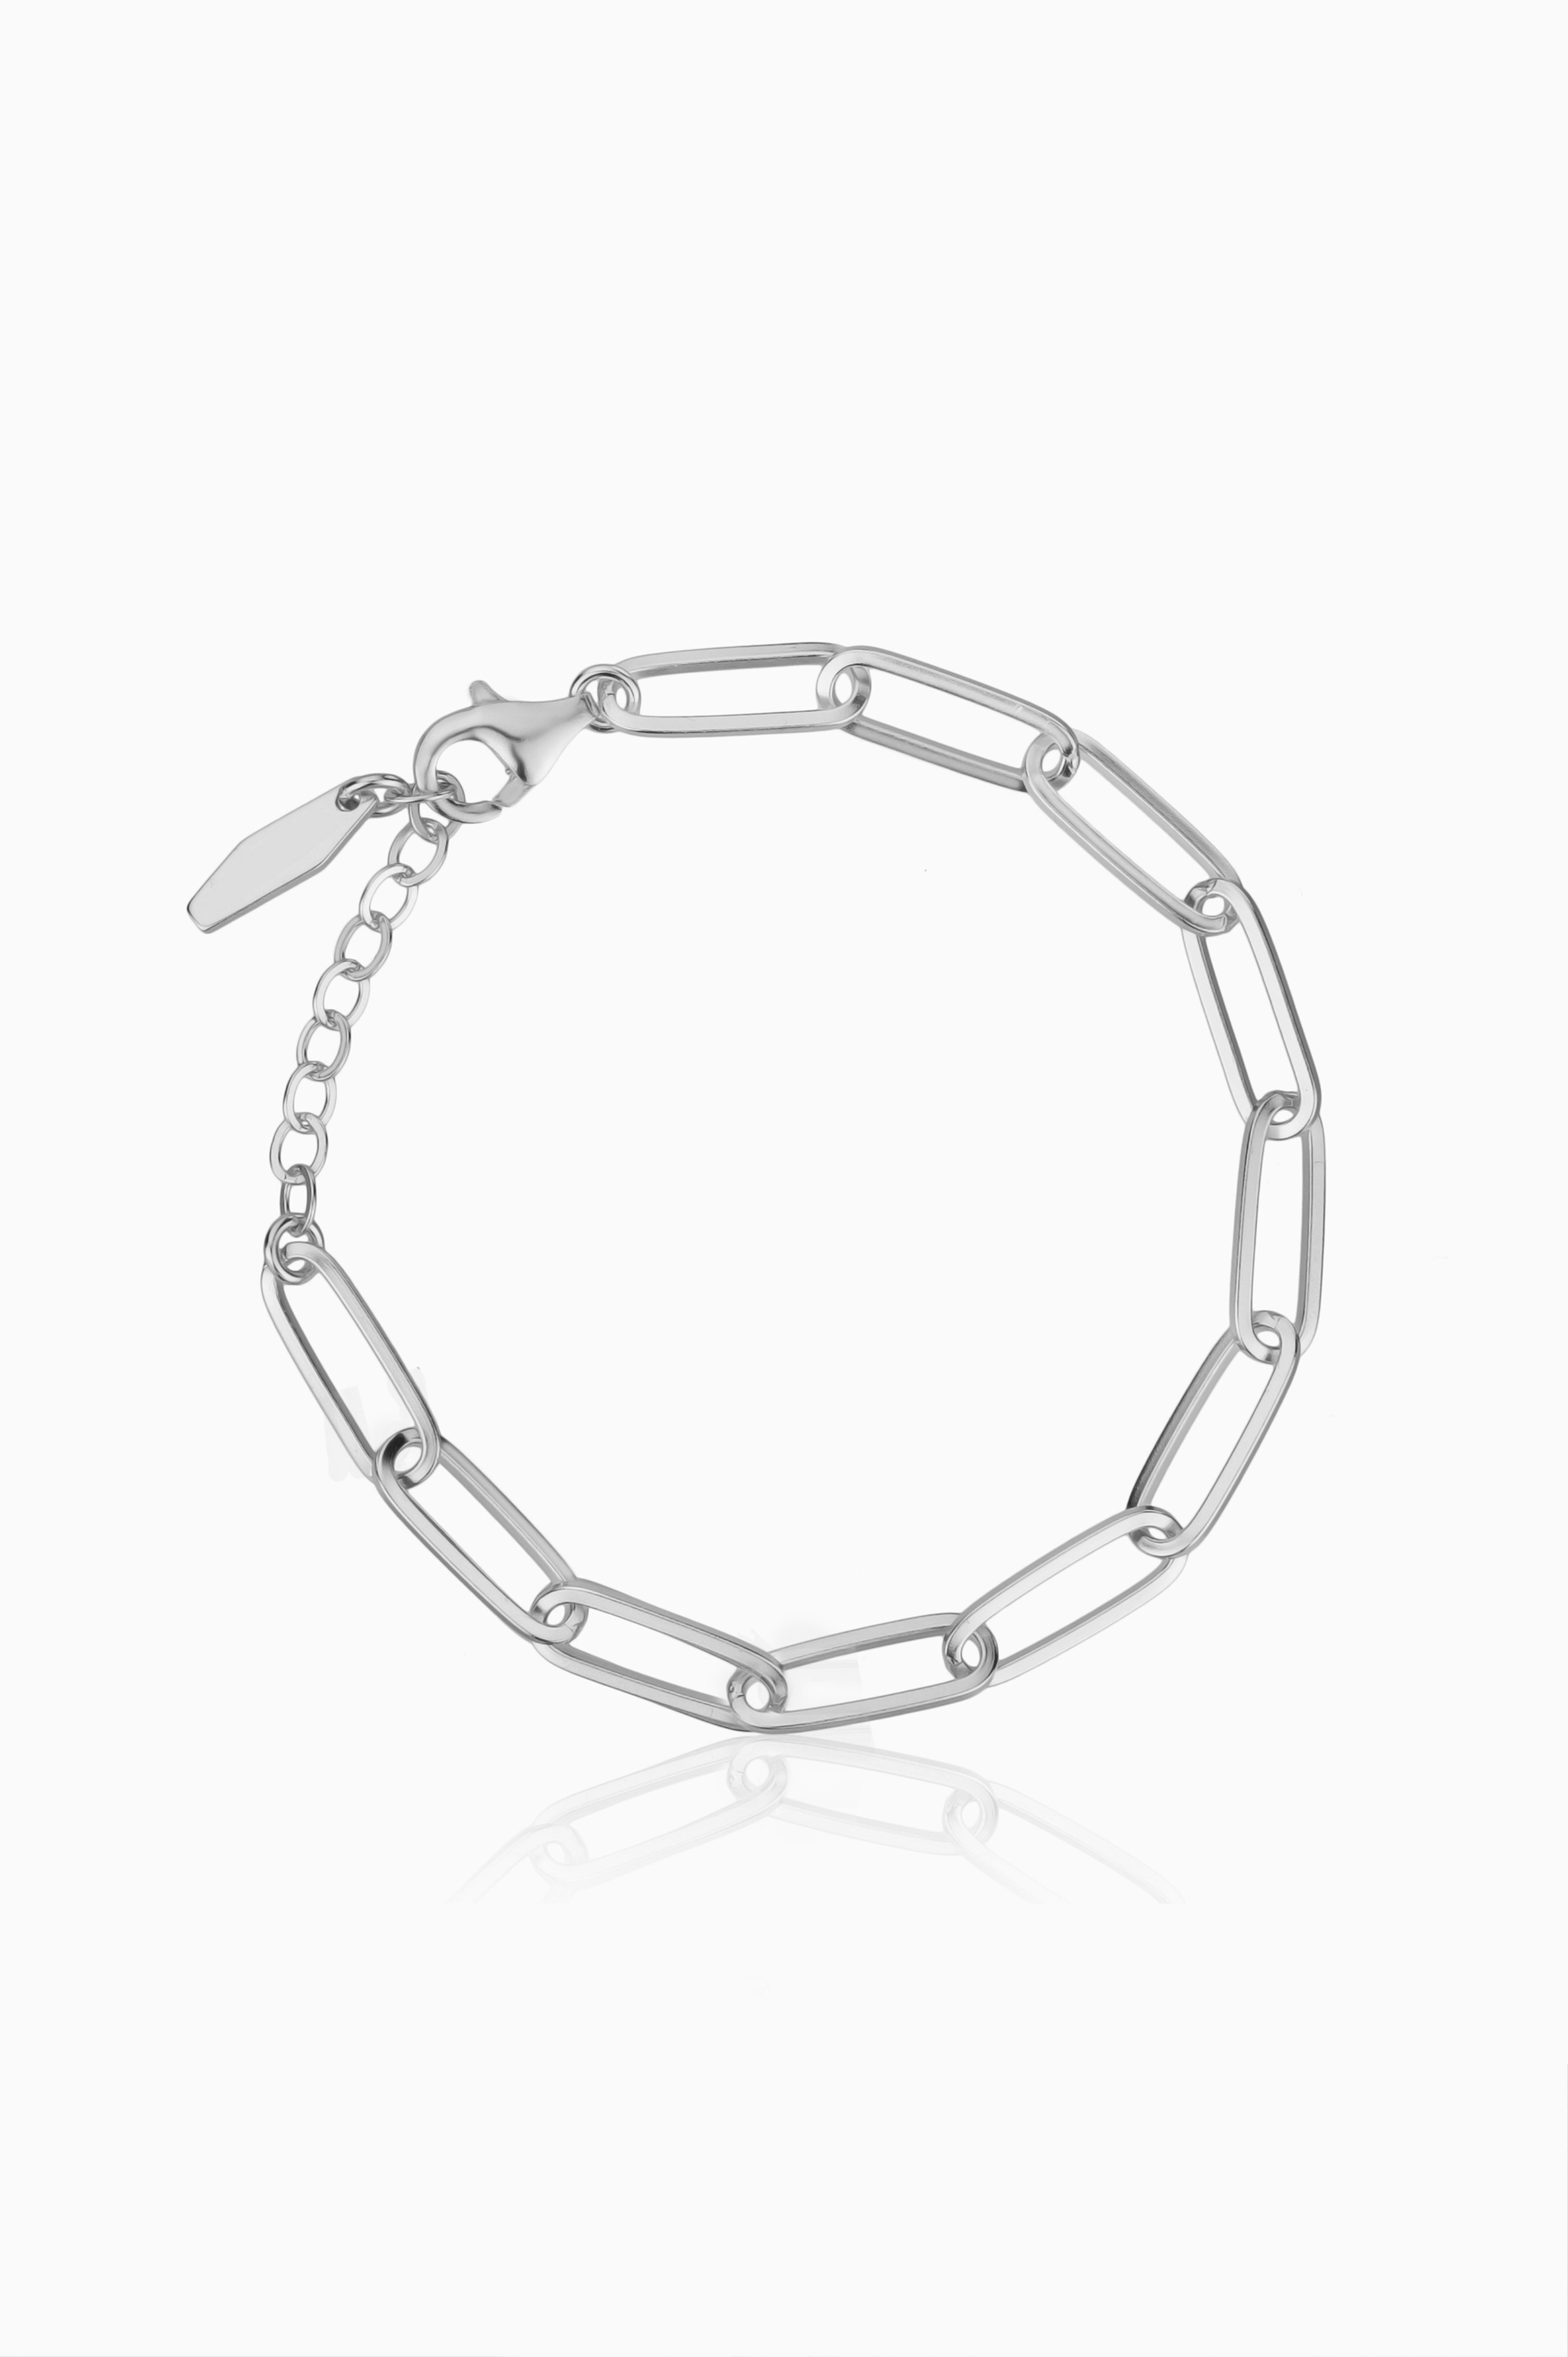 Gold-plated bracelet WIDE CHAIN 925 silver